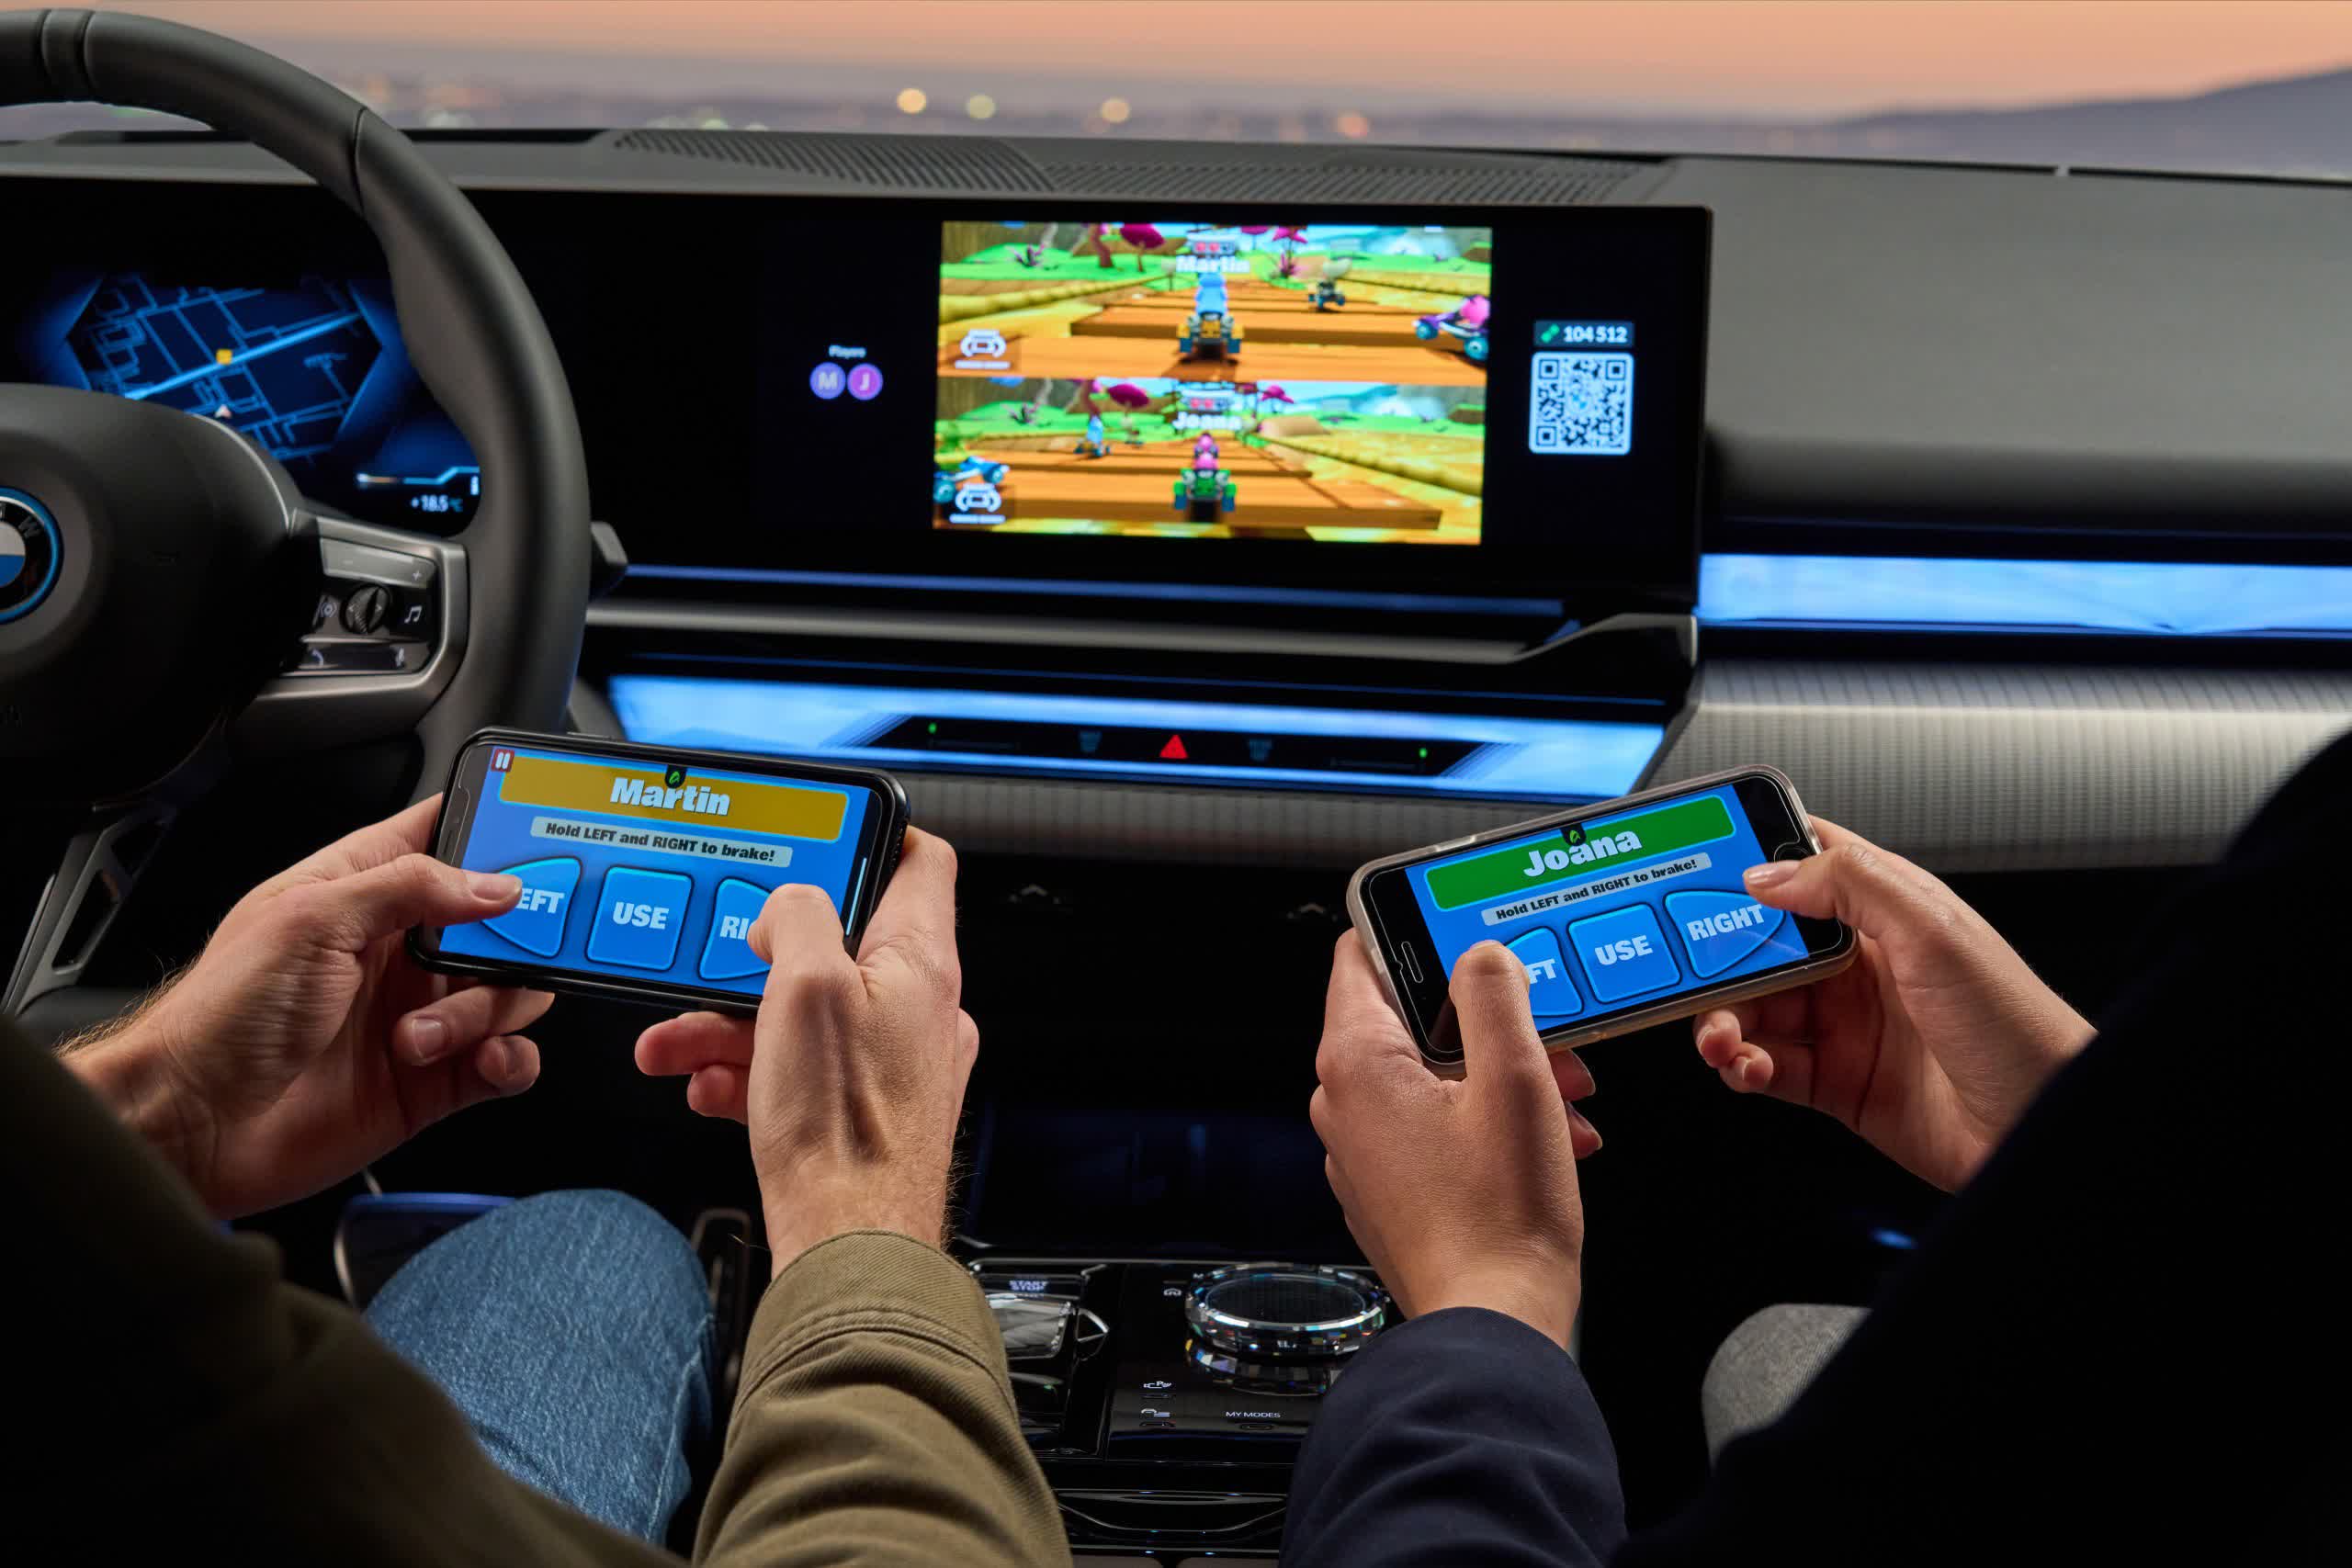 New BMW 5 Series softens charging wait times with in-car multiplayer gaming